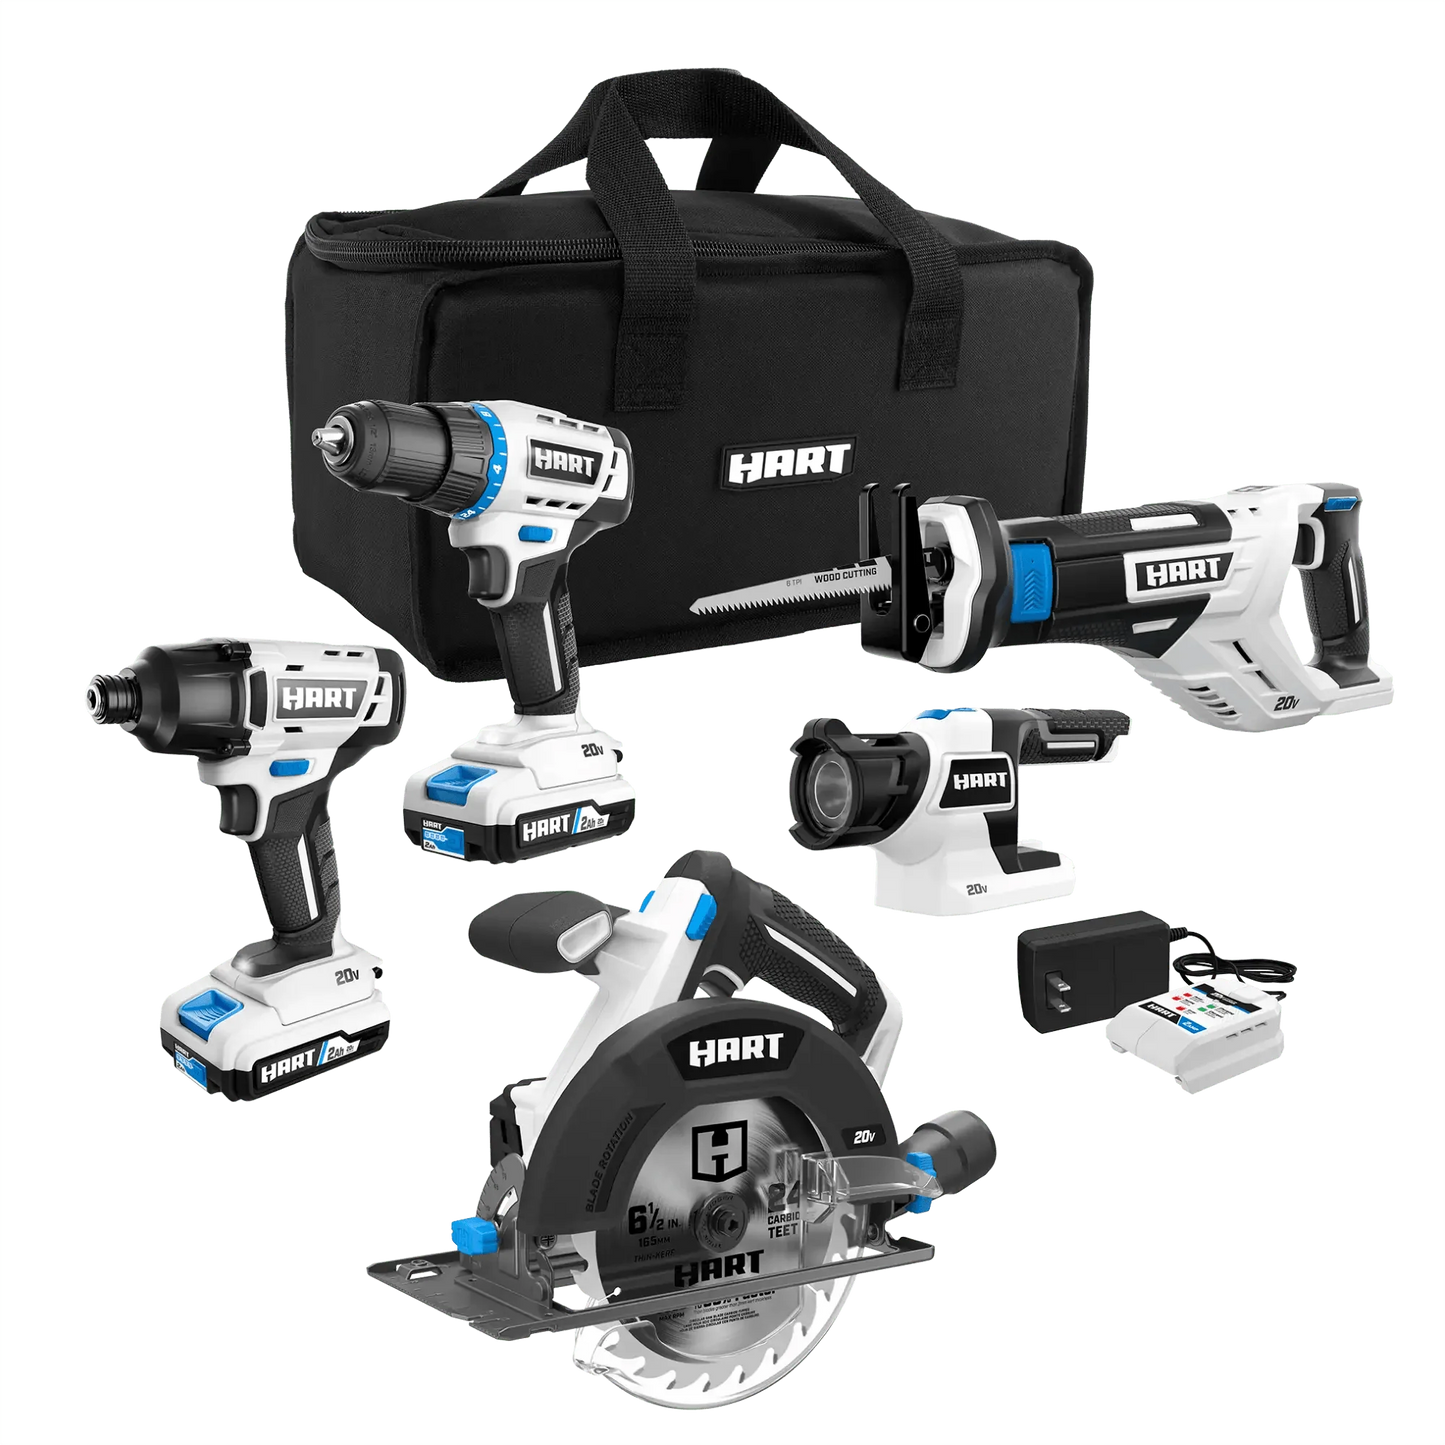 20V 5 Tool Combo Kit with Storage Bag and (2) 2.0Ah Batteries